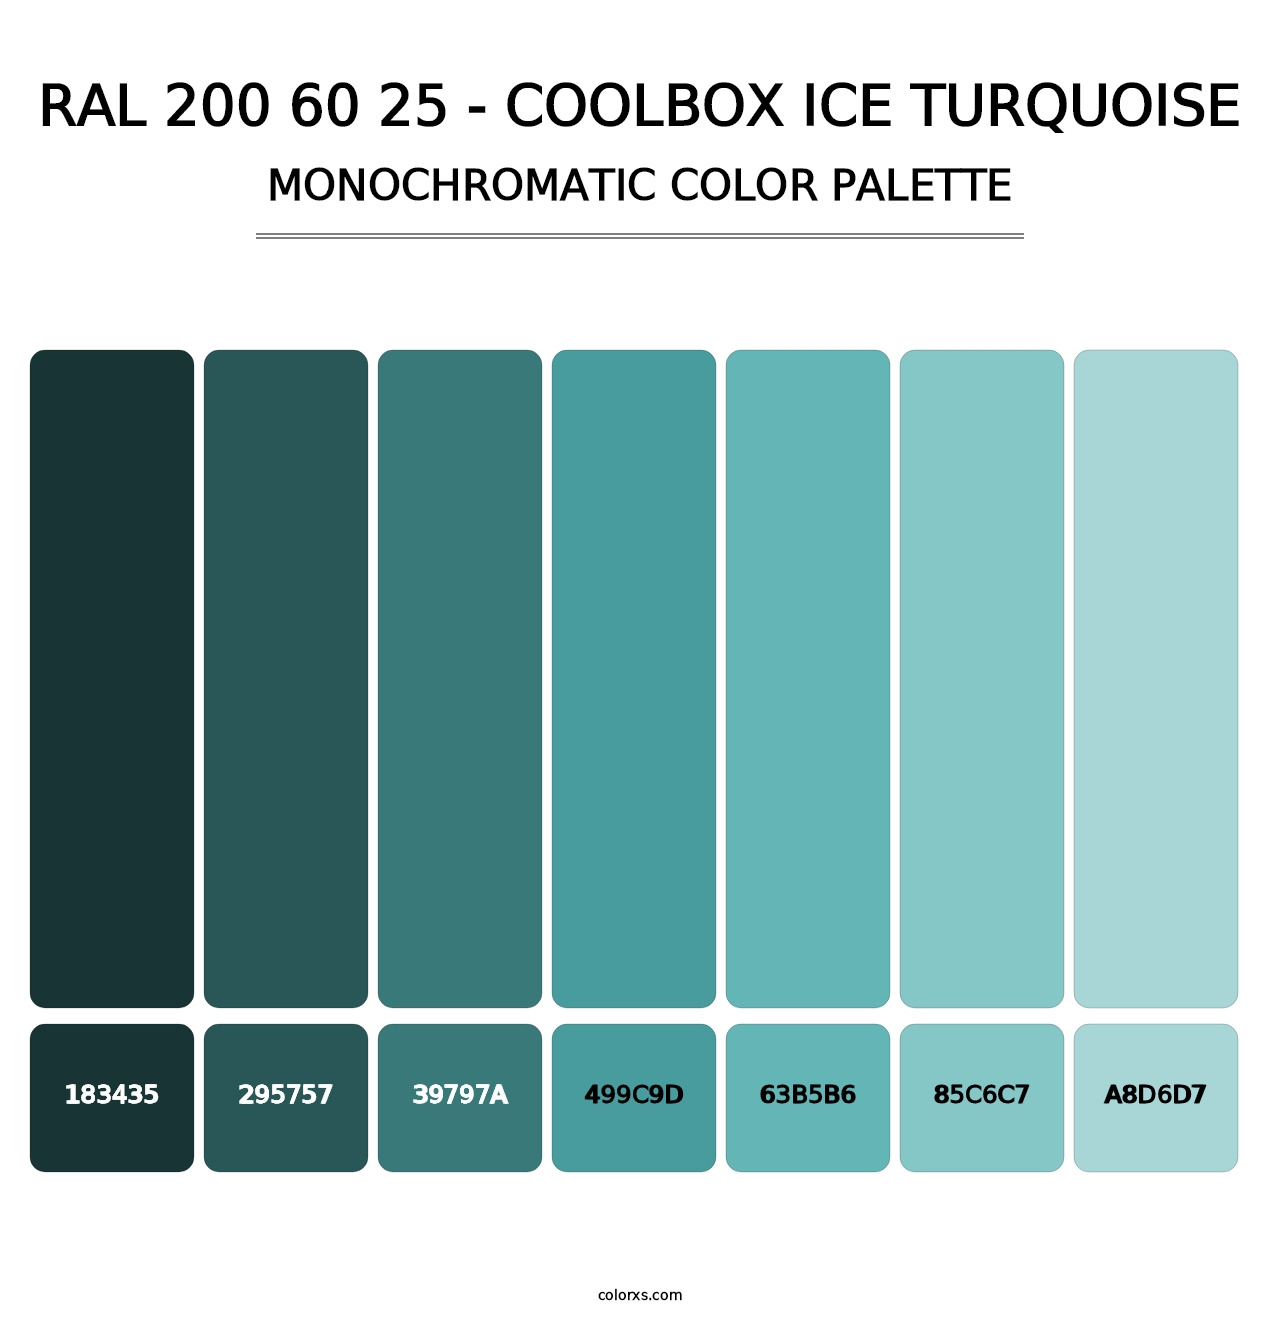 RAL 200 60 25 - Coolbox Ice Turquoise - Monochromatic Color Palette